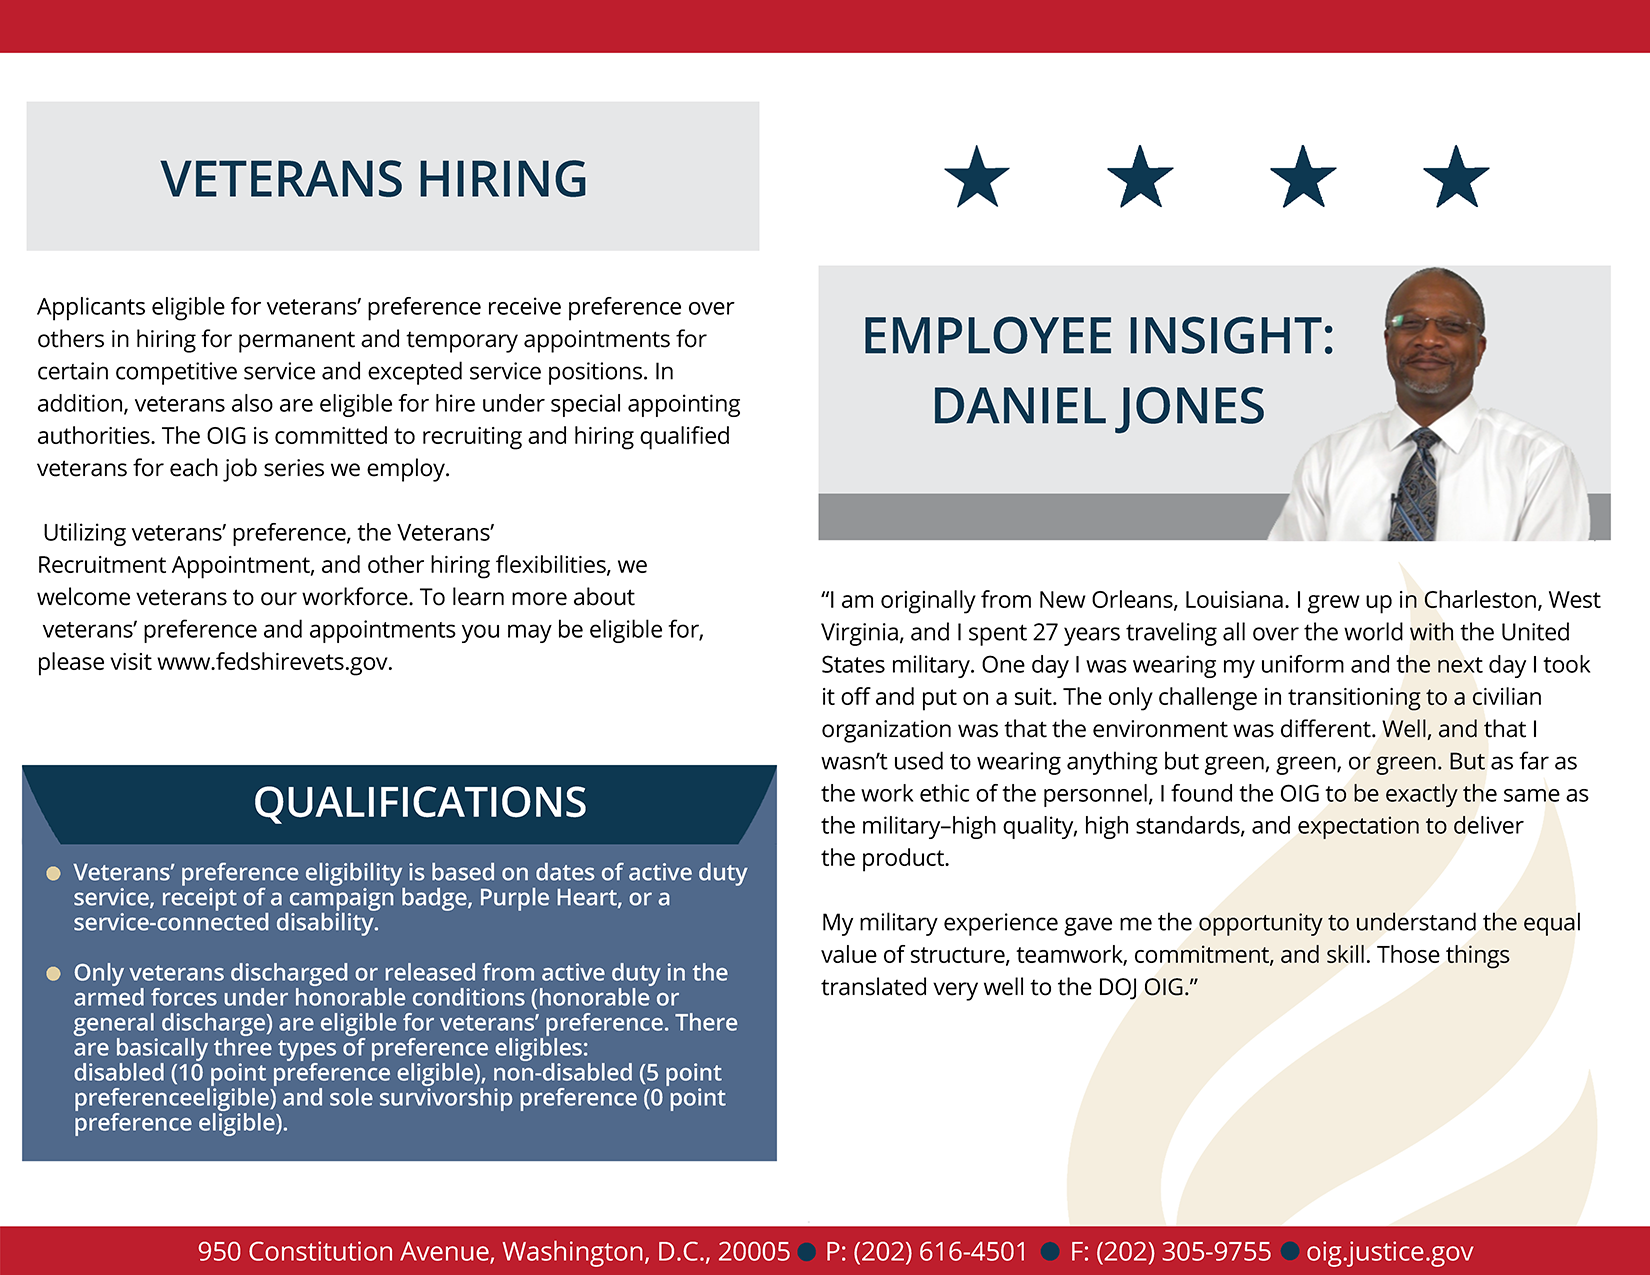 Read more about the veterans employee experience